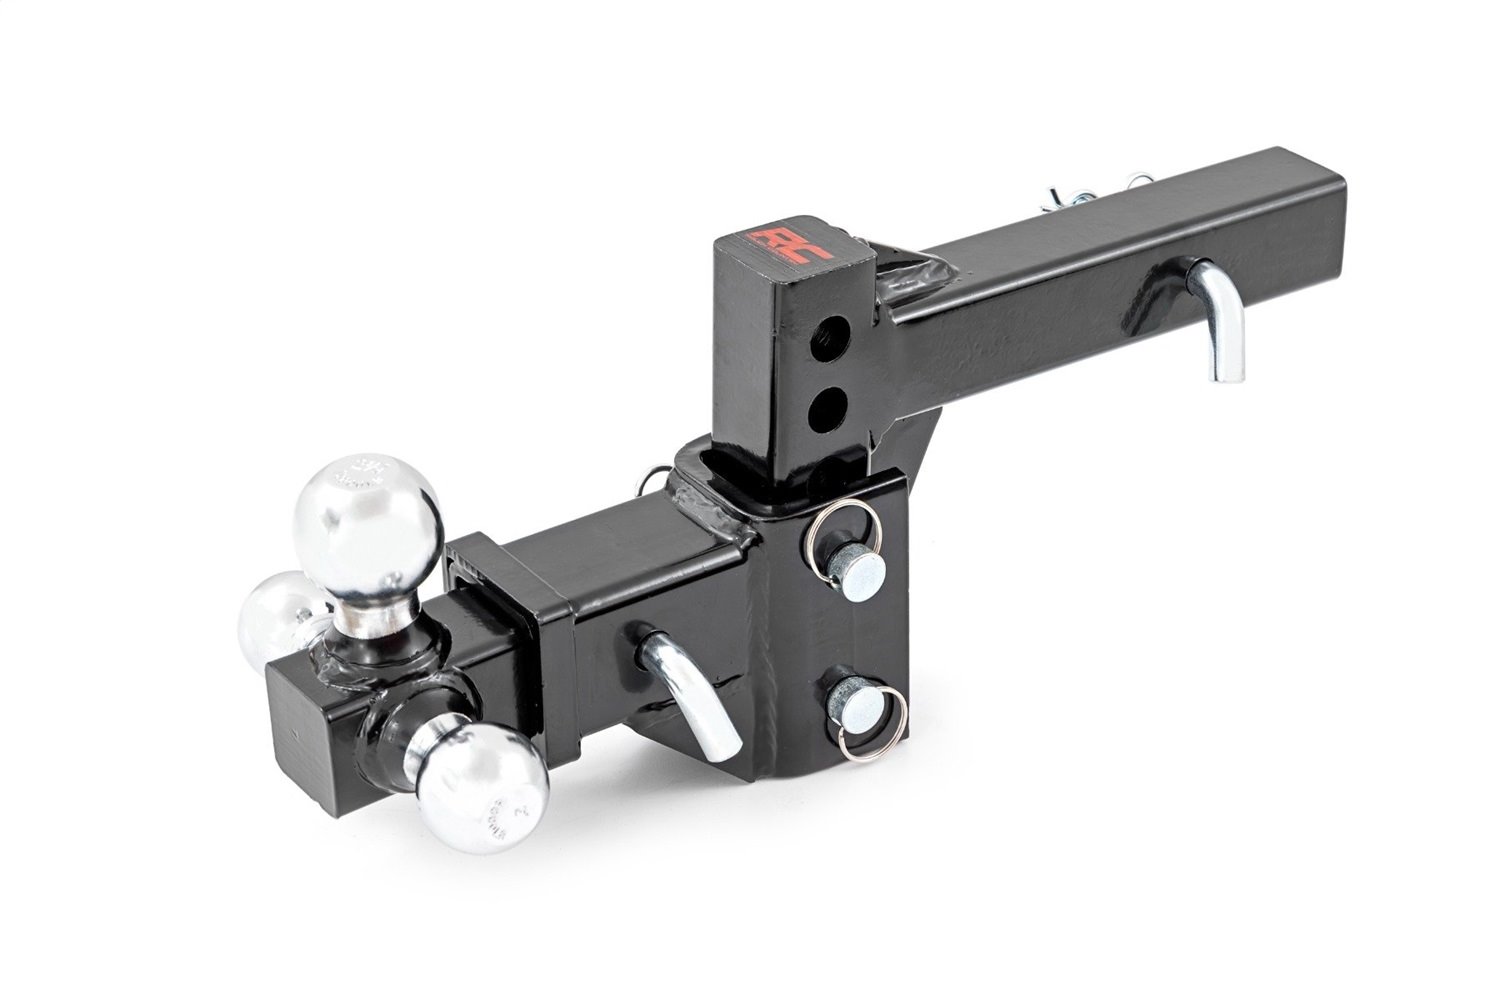 99100 Adjustable Trailer Hitch, 6 in. Drop, Multi-Ball Mount, Fits 2 in. Receiver